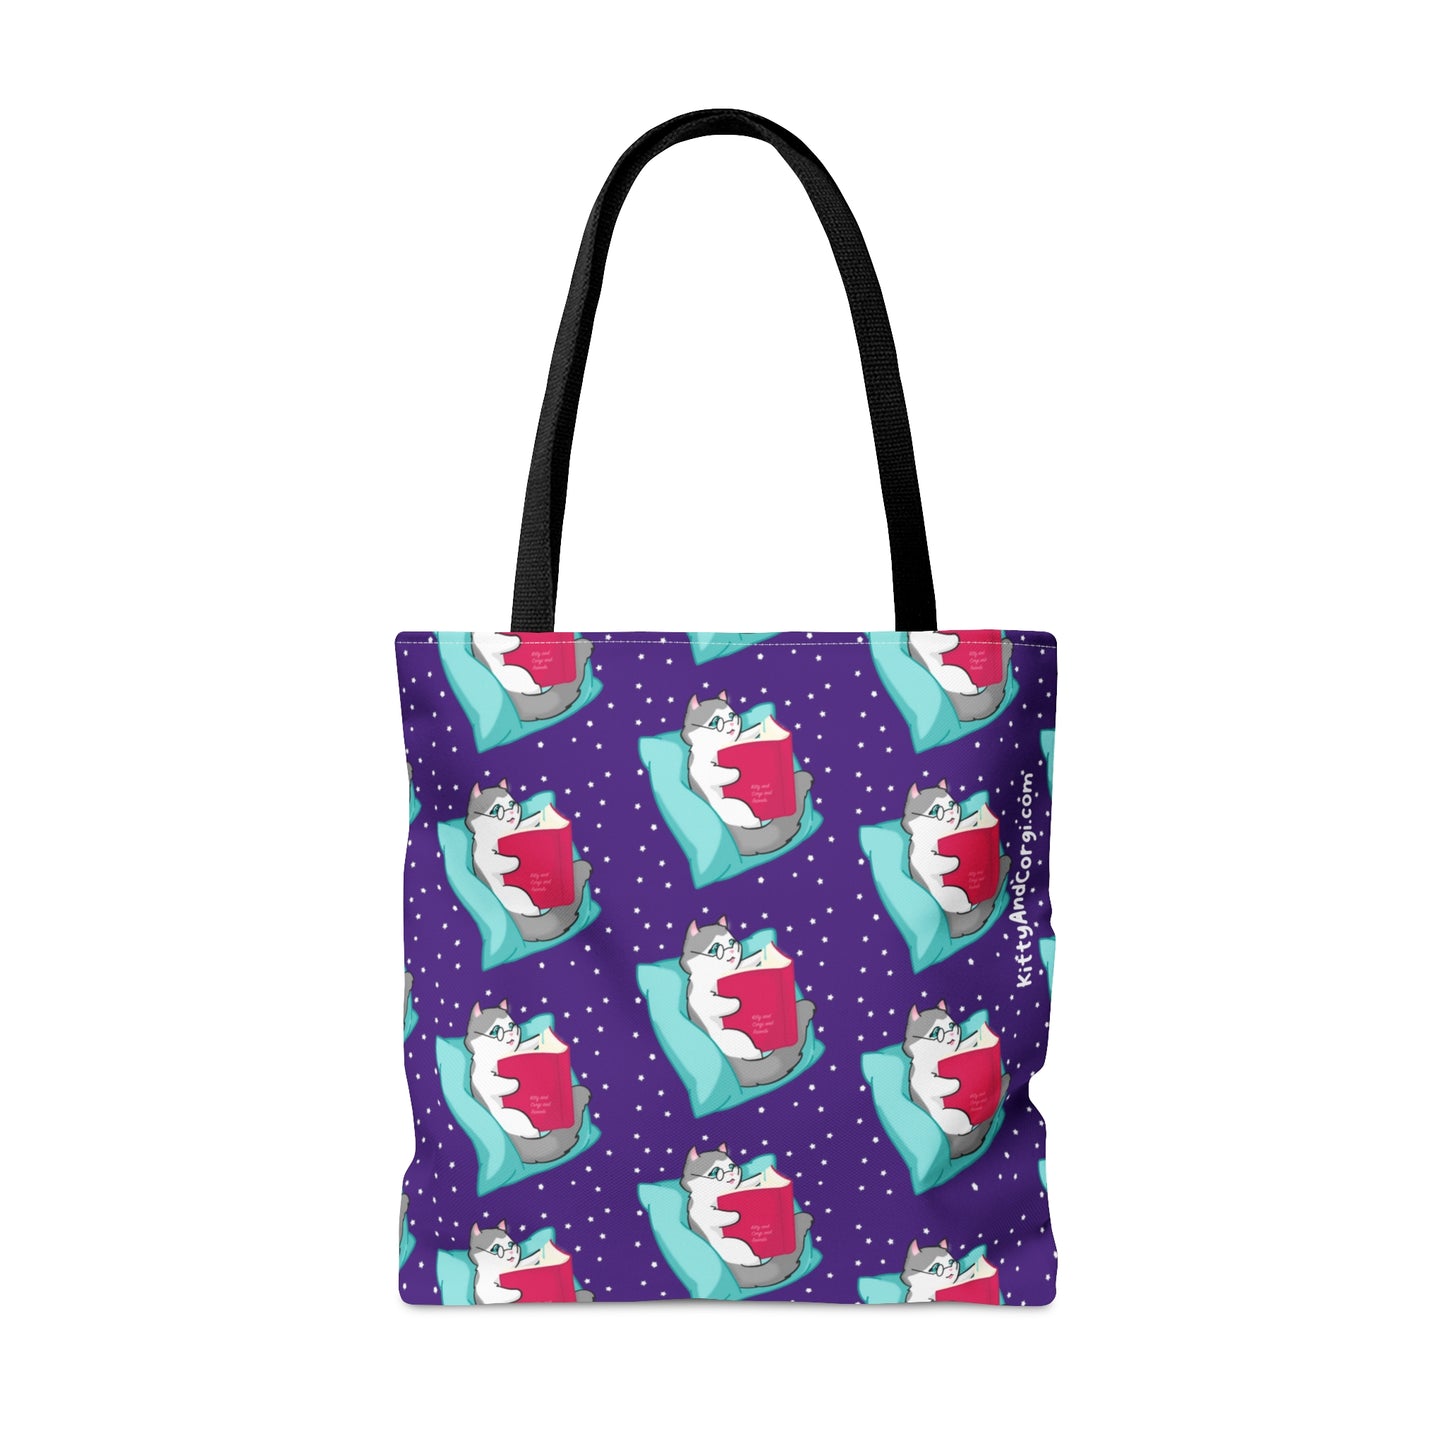 Kitty Reading a Book - Repeating Pattern in Dark Purple - Tote Bag (AOP)